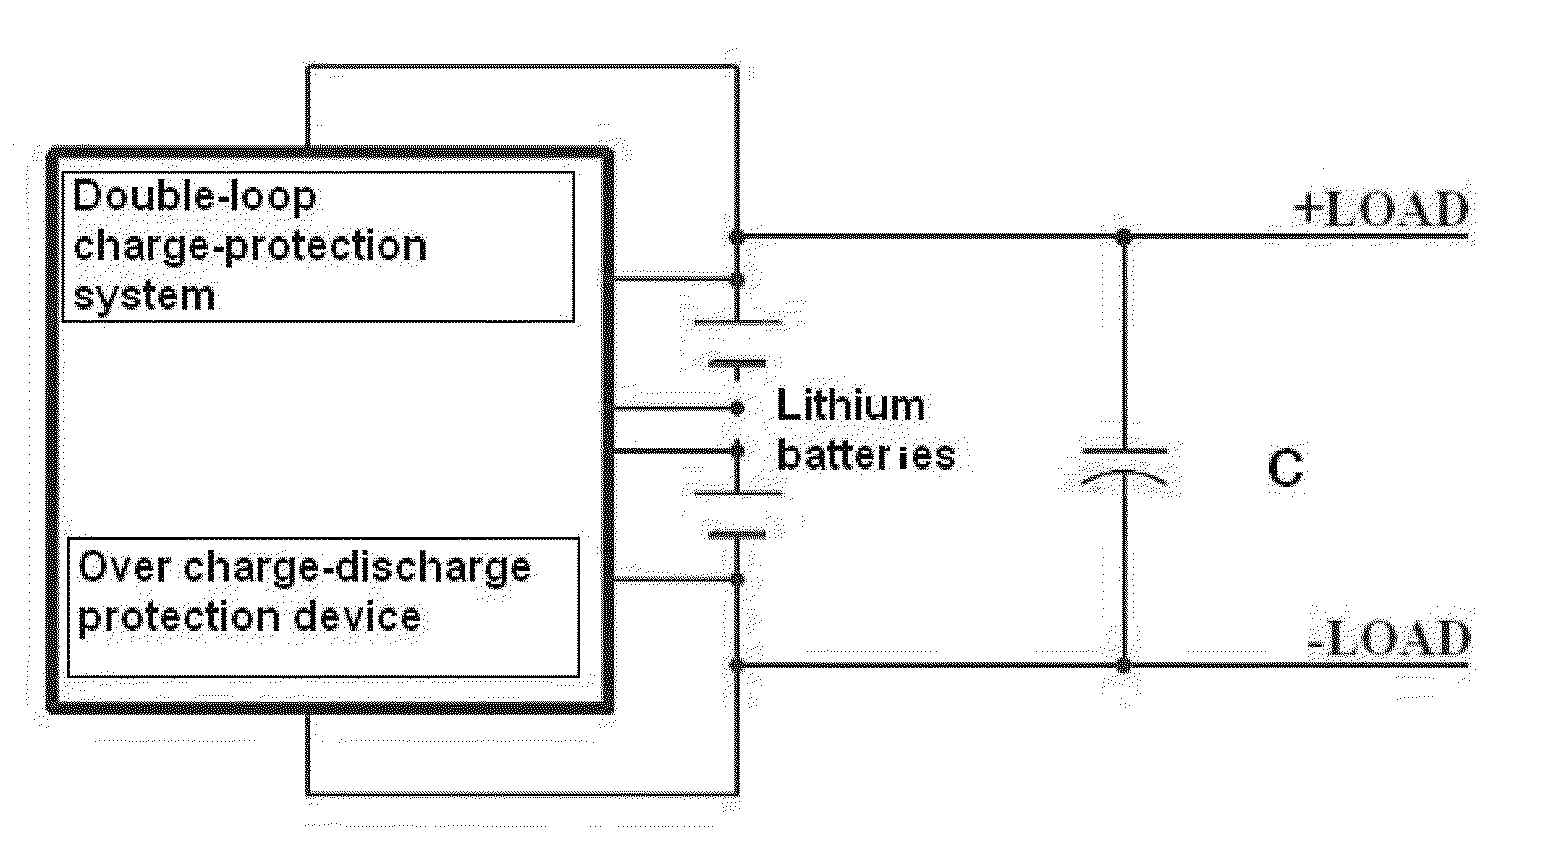 Lithium-ion auto startup storage battery with a supercapacitor function